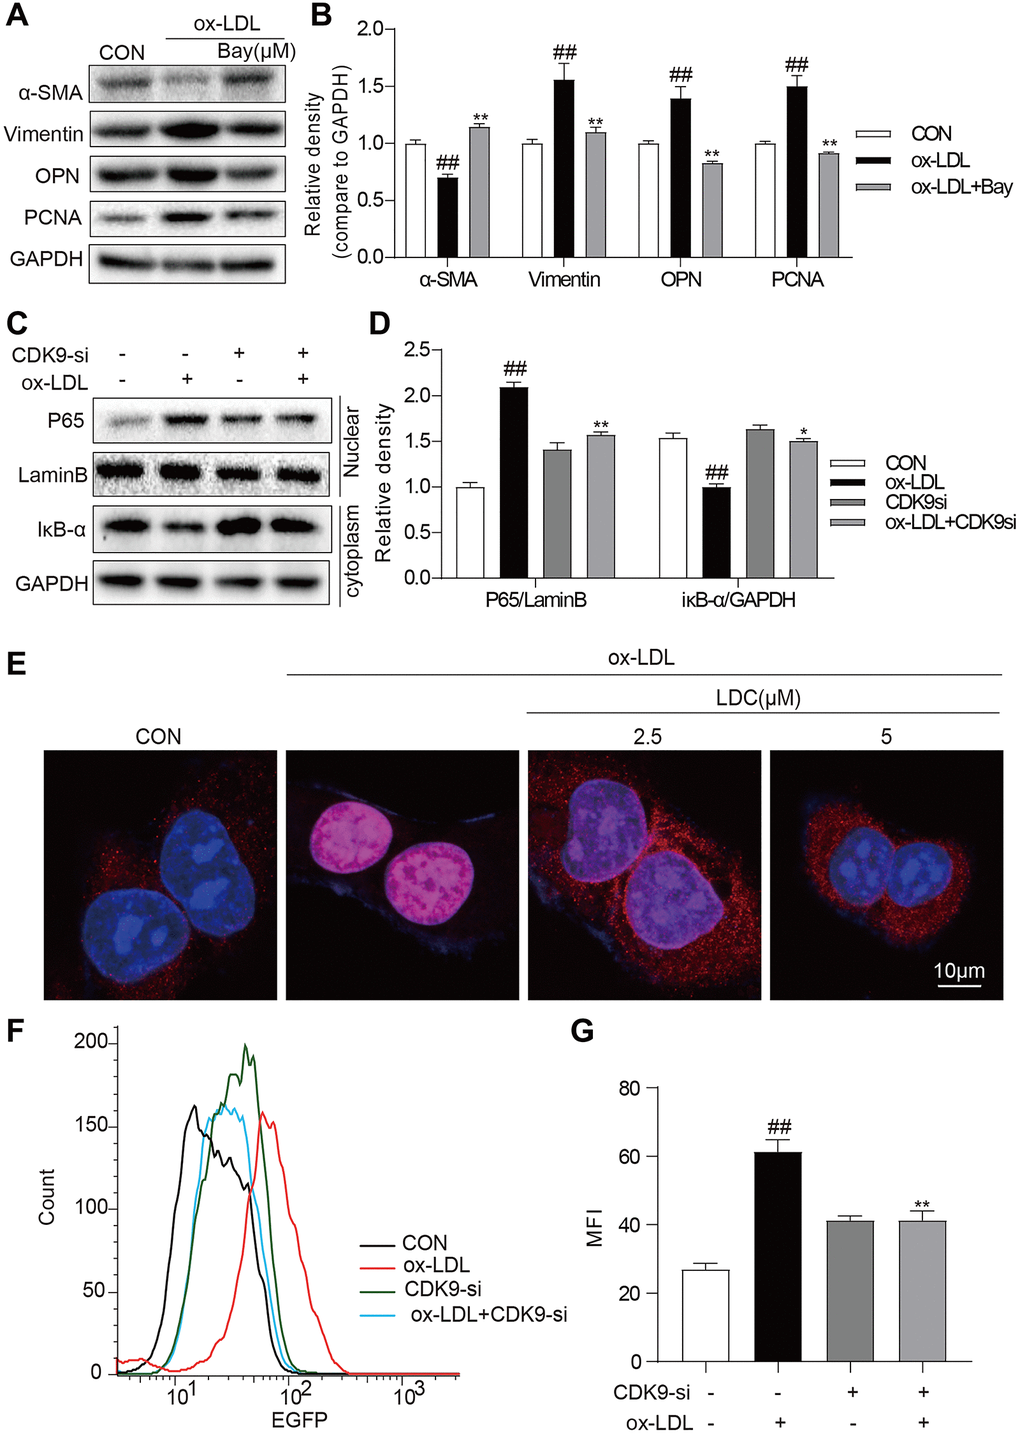 CDK9 inhibitor reduces inflammatory responses and phenotype switch of VSMCs exposed to ox-LDL by suppressing NF-κB pathway. (A–B) VSMCs were treated with the Bay (10μM) for 1 h, and then stimulated with ox-LDL (50μg/mL) for 24 h. The expressions of α-SMA, Vimentin, and PCNA were detected by western blot ((n = 3; ##P *P **P C–D) transfected with siRNA against CDK9 and then incubated with ox-LDL (50 μg/mL) for 1 h. The IκB-α protein level in cell lysate was detected by western blot; and the nuclear fraction was isolated and the nuclear level of NF-κB p65 was measured by western blot (n = 3; ##P *P **P E) VSMCs were pretreated with LDC000067 (2.5 or 5 μM) for 1 h, and then stimulated with ox-LDL (50 μg/mL) for 1 h. Nuclear translocation of NF-κB p65 was measured by immunofluorescence staining (scale bar = 10 μm). (F–G) NF-κB-RE-EGFP reporter VSMCs were transfected with siRNA against CDK9 and then stimulated with ox-LDL (50 μg/mL) for 6 h. NF-κB activity is shown as mean fluorescence intensity (MFI) in flow cytometry histogram (n = 3; ##P **P 